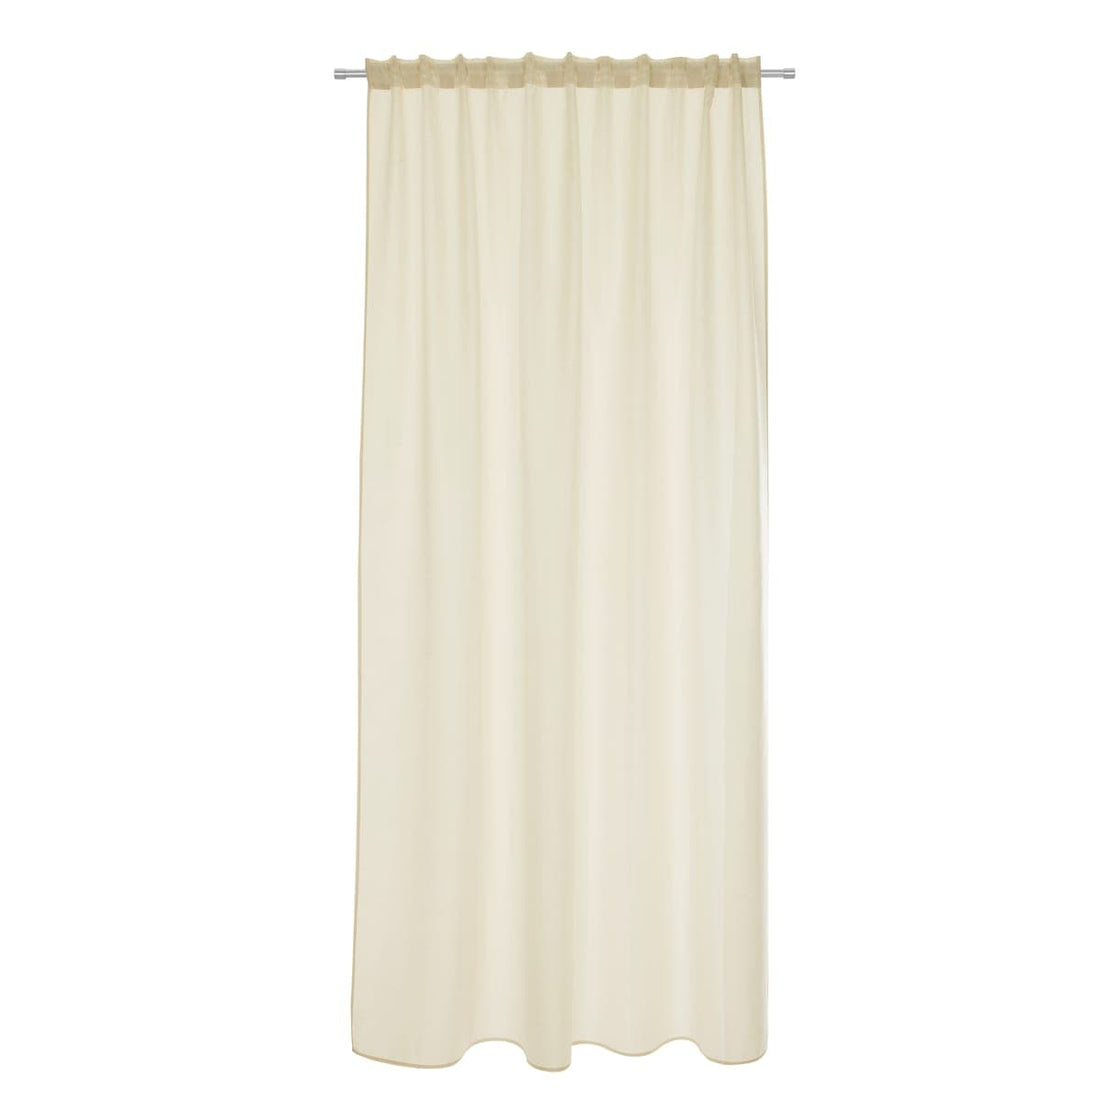 BEIGE OPAQUE SILKA CURTAIN 200X280 CM WITH CONCEALED LOOP AND WEBBING - best price from Maltashopper.com BR480009479